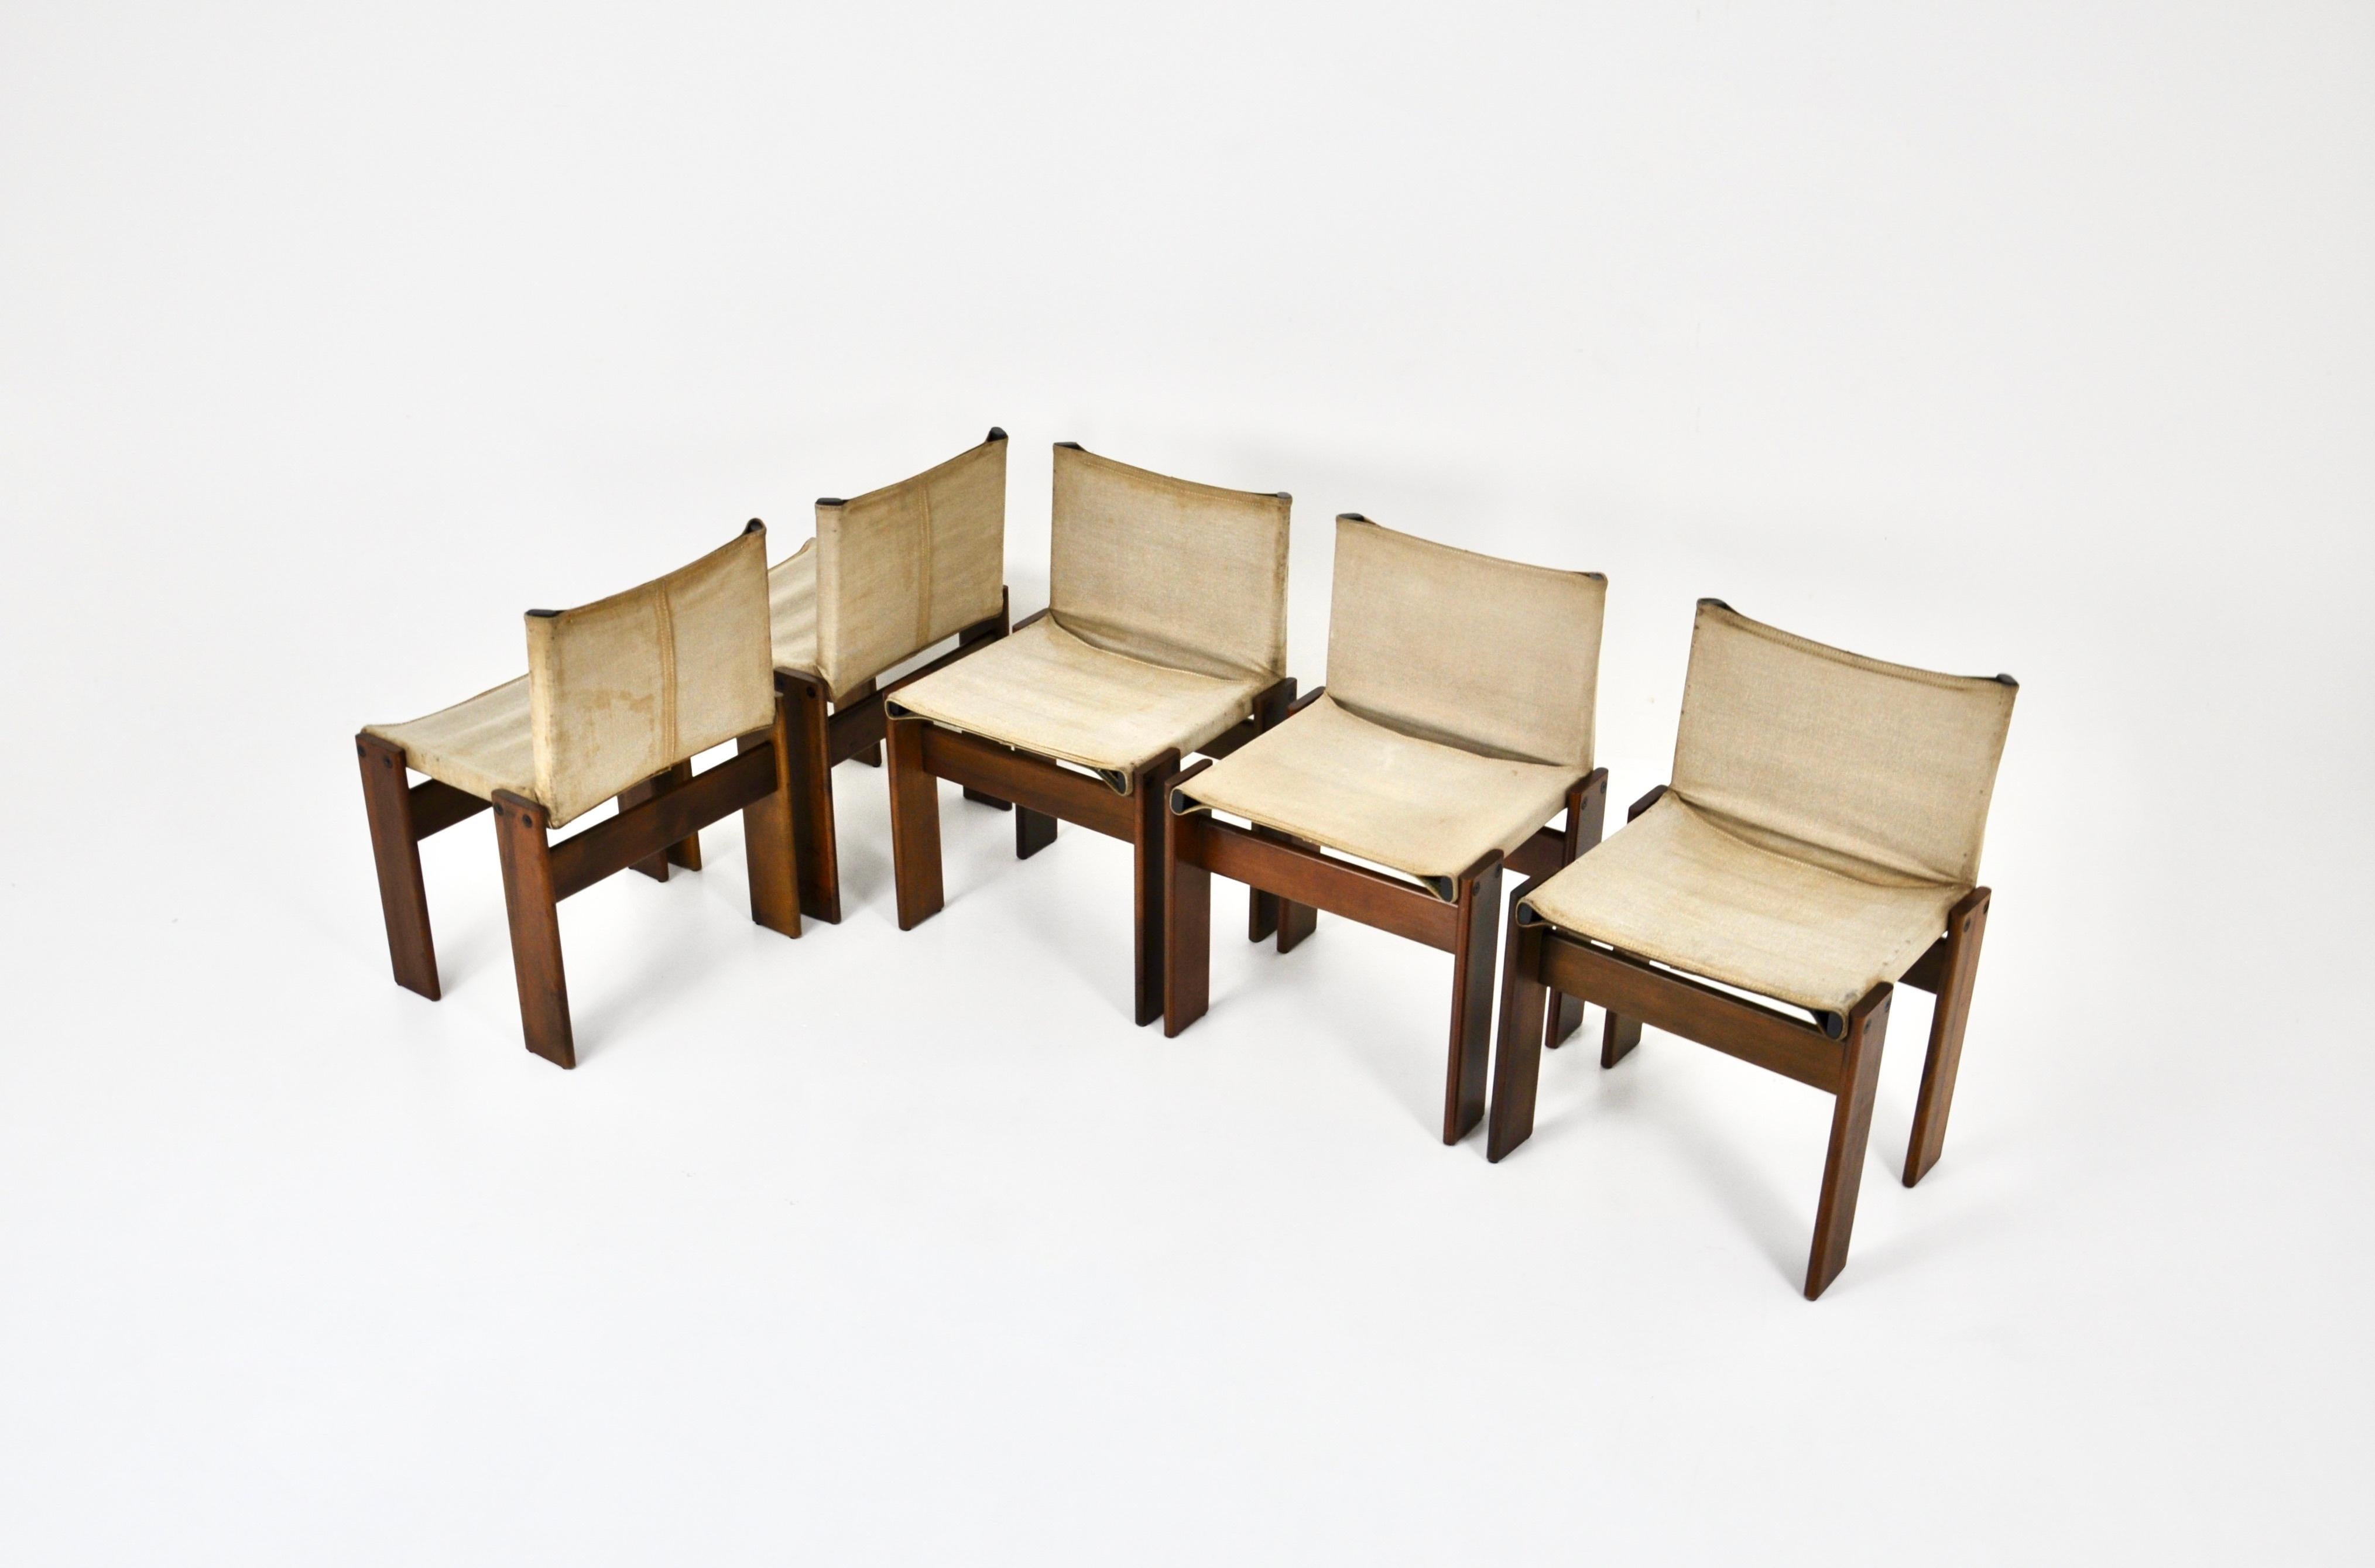 Wood Monk Dining Chairs by Afra & Tobia Scarpa for Molteni, 1970s, set of 5 For Sale